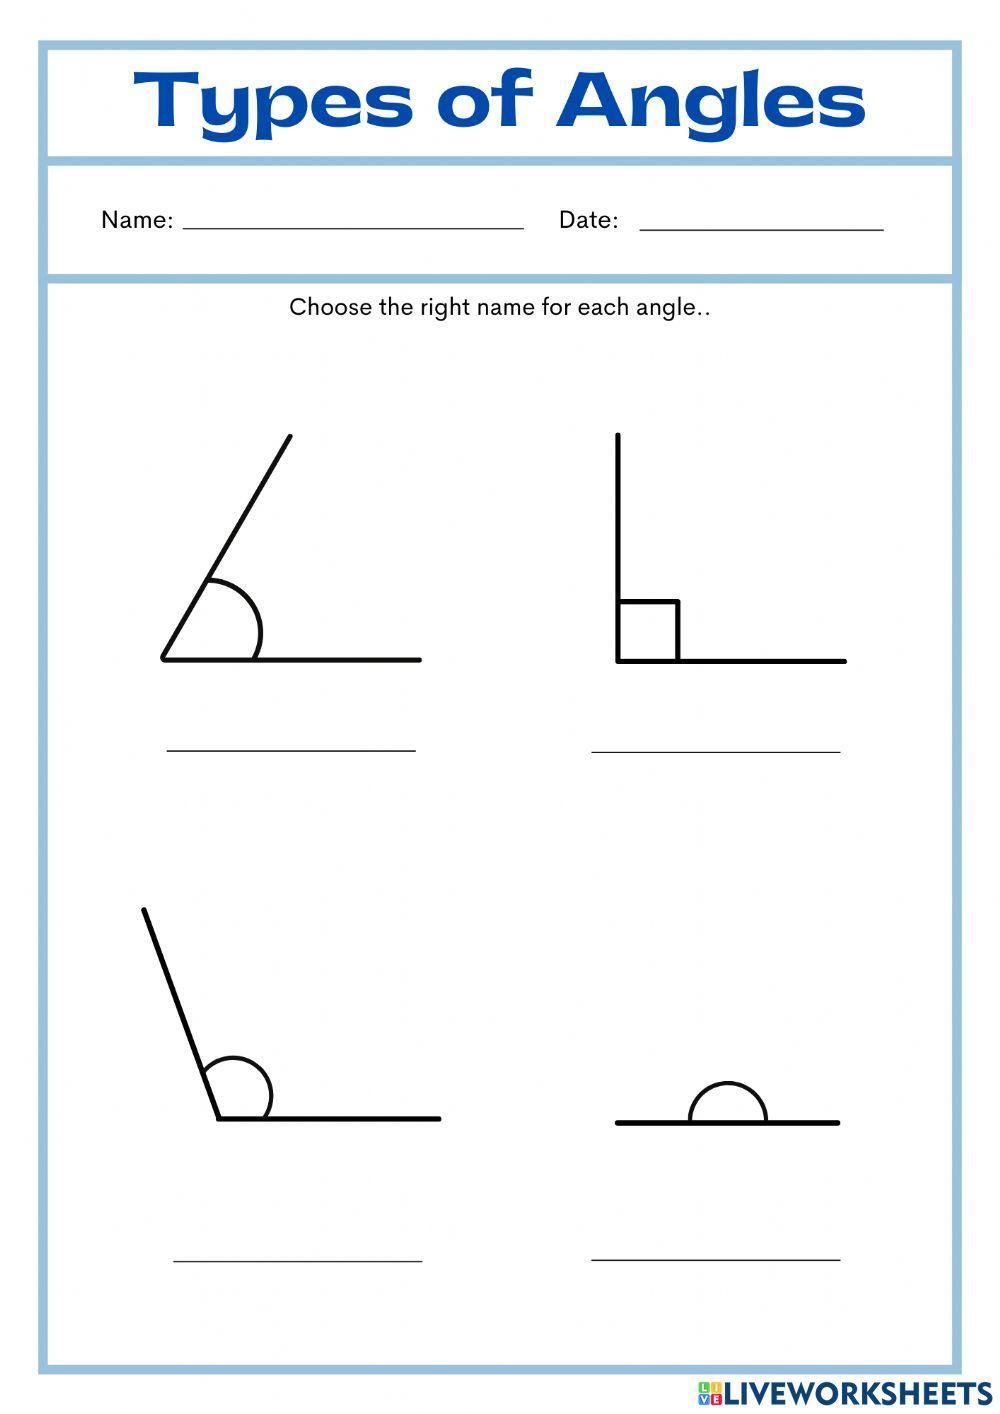 types of angles worksheet